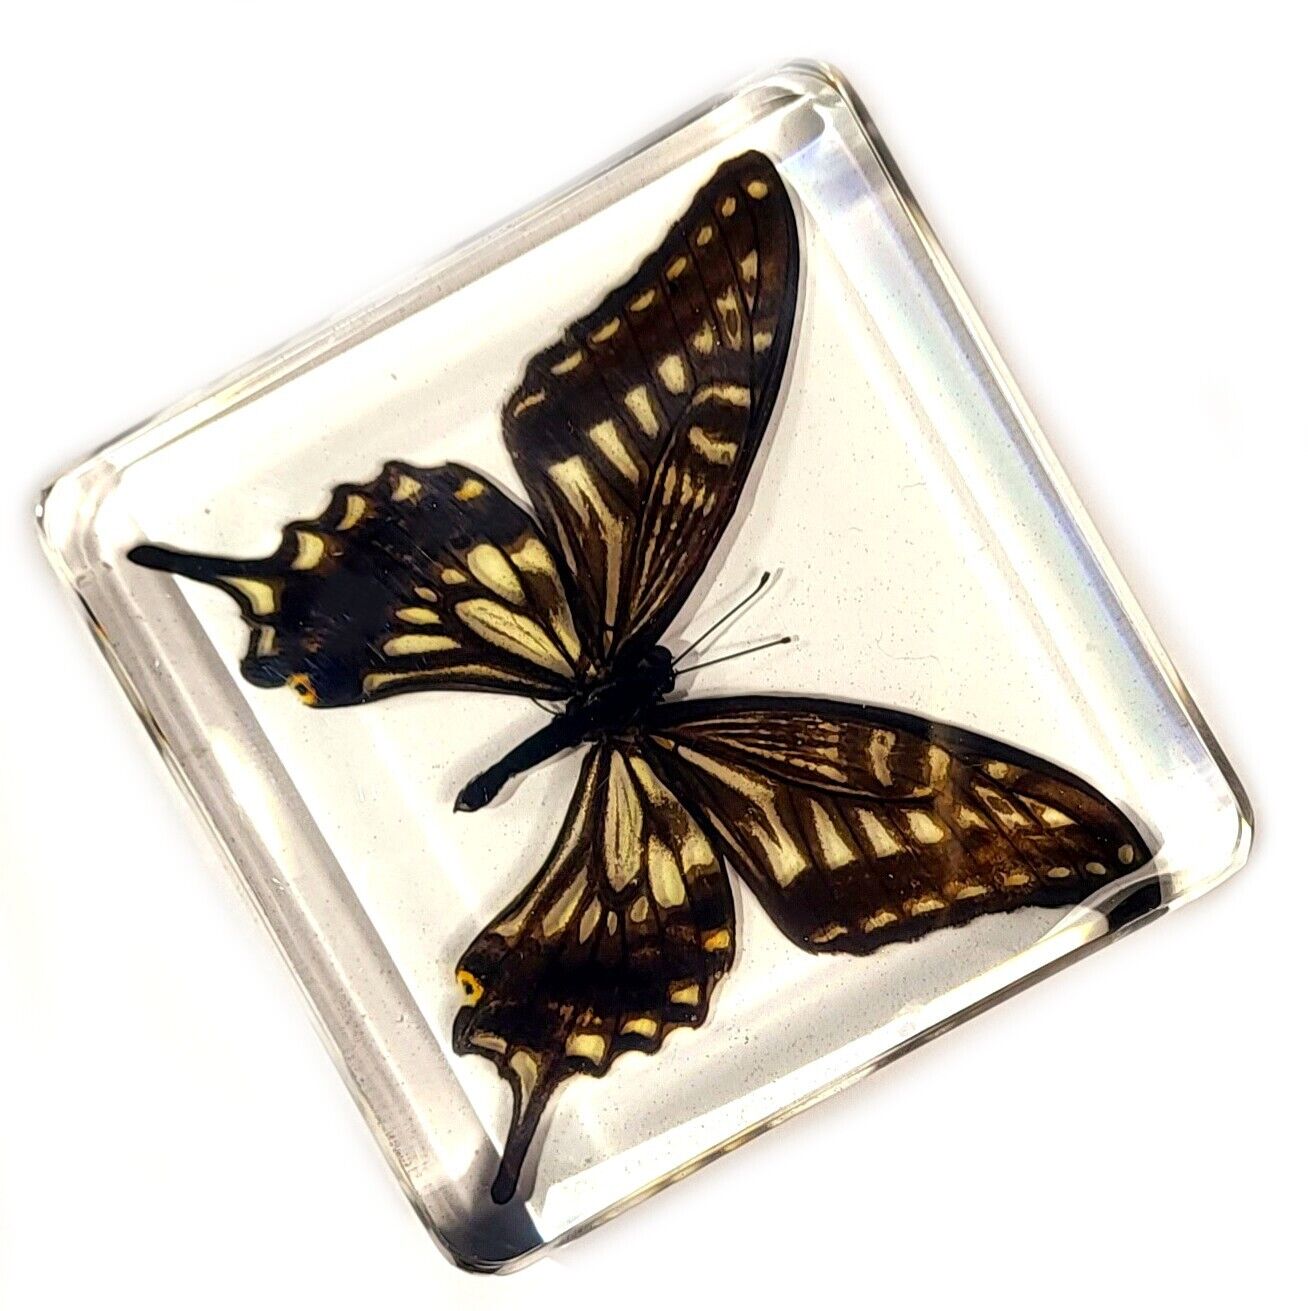 75mm Real Asian Swallowtail Butterfly in Clear Lucite Science Education Specimen